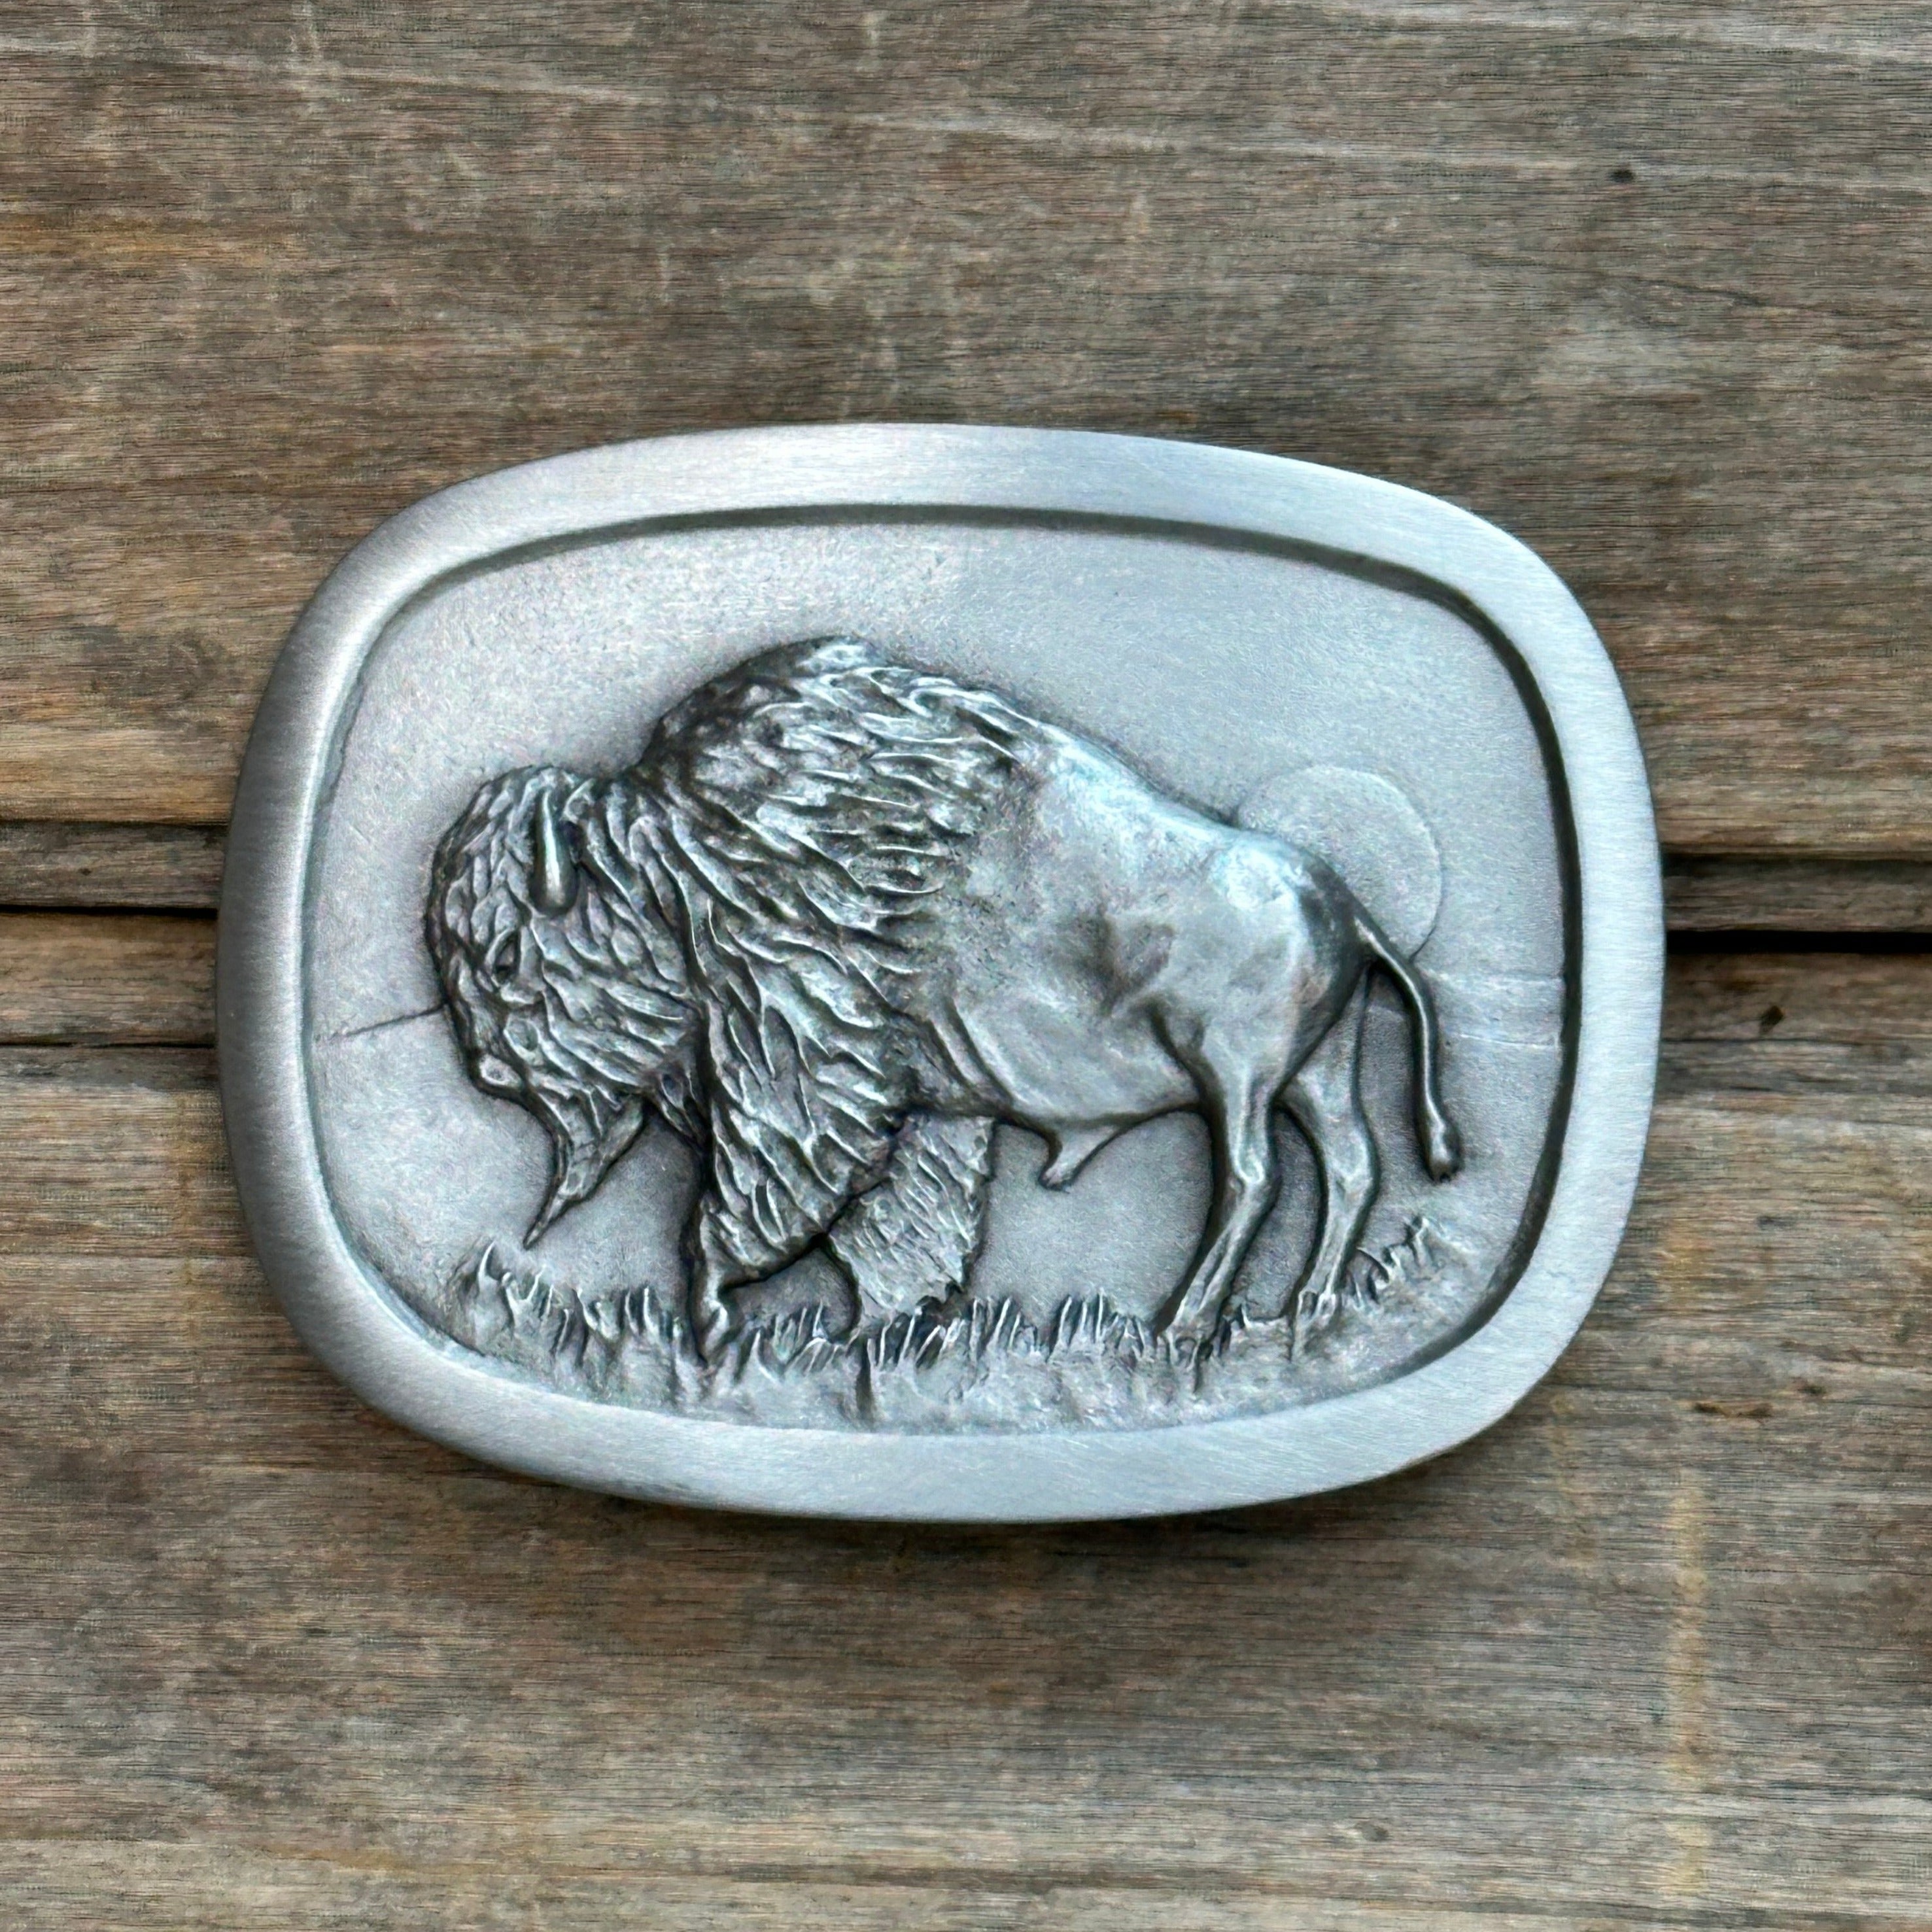 This is a pewter buckle with a silver tone.  It depicts a bison on the prairie with a sun setting over the hills in the background.